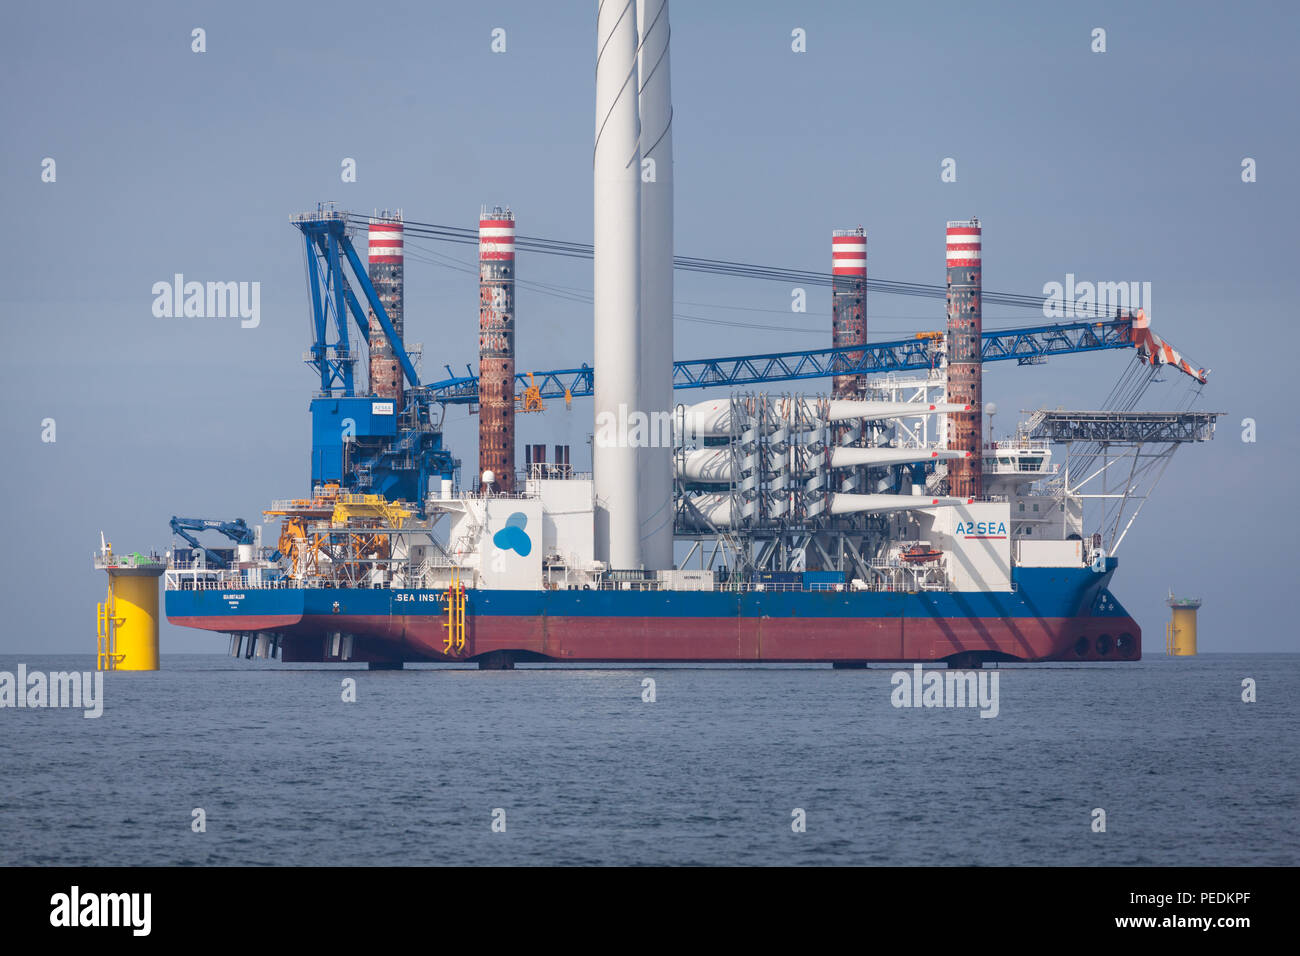 A2Sea's jack-up installation vessel, Sea Installer, on the Race Bank Offshore Wind Farm in the Southern North Sea, UK Stock Photo